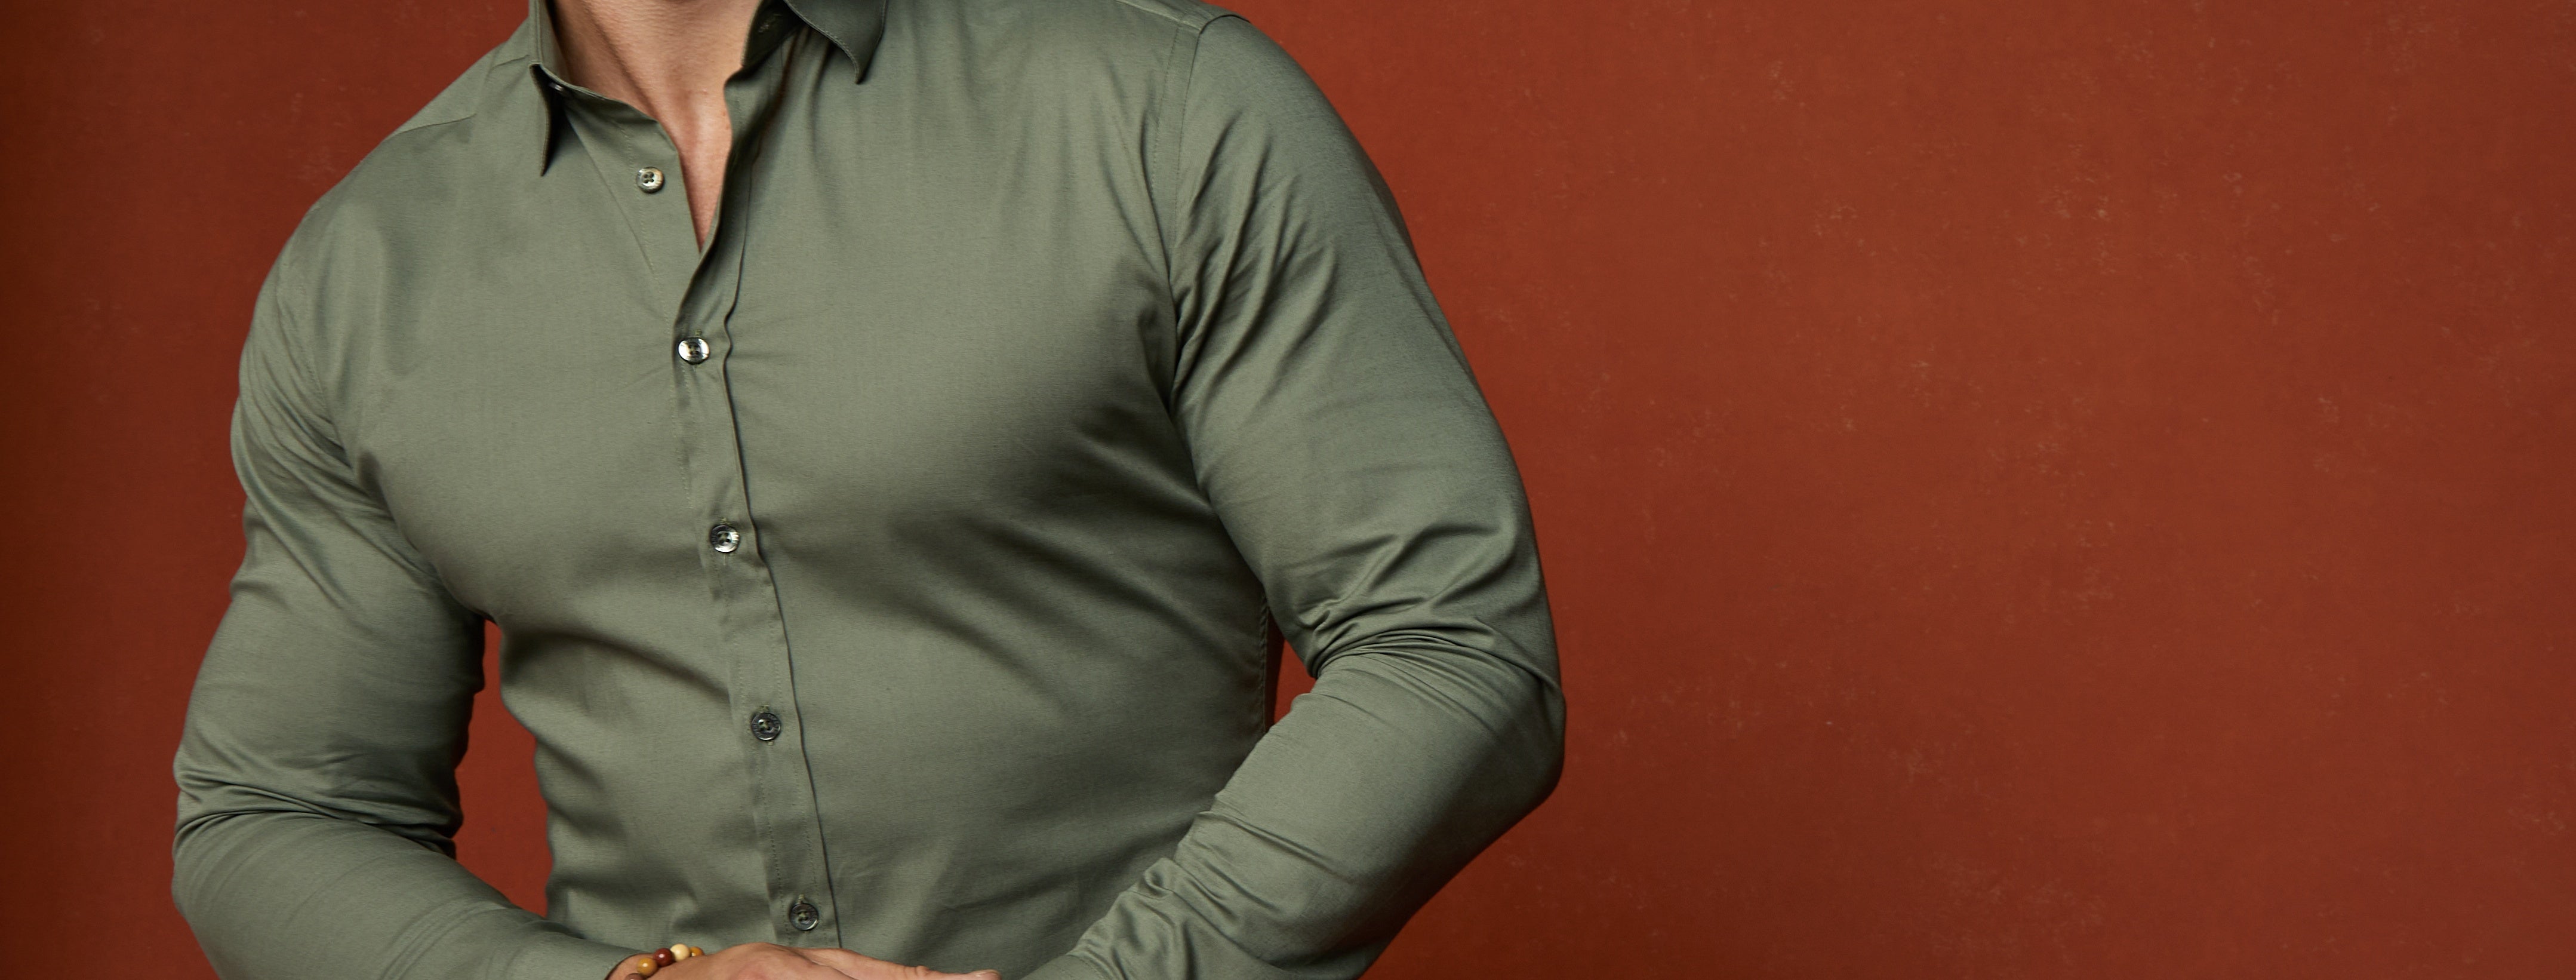 Why We Think This Dress Shirt Company Is One of the Best Values